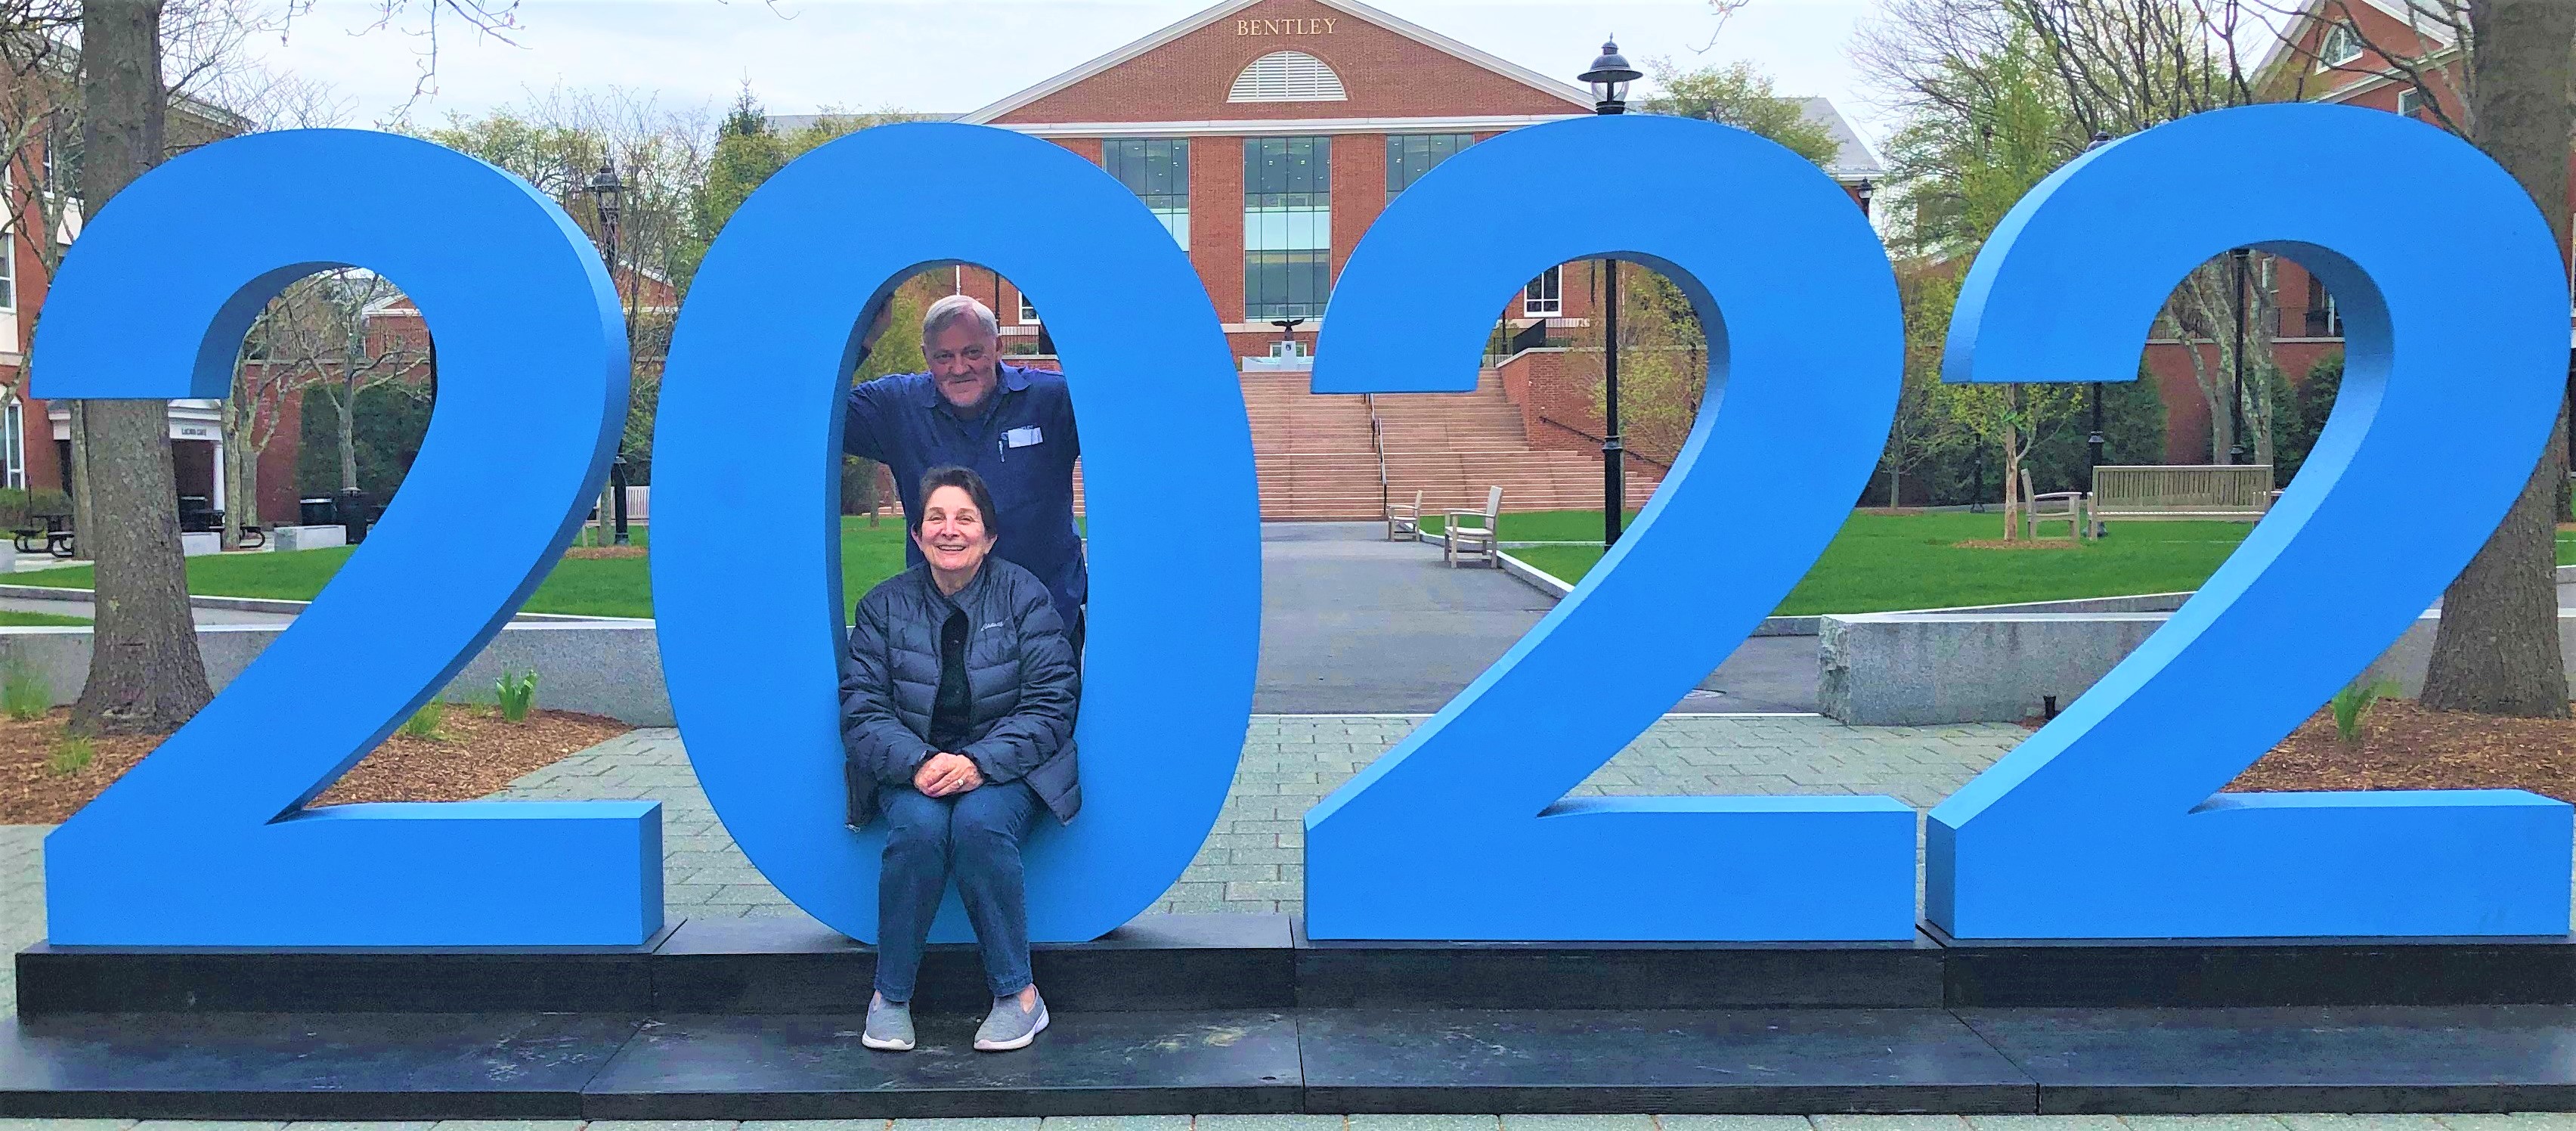 Maria and David in front of the 2022 sign